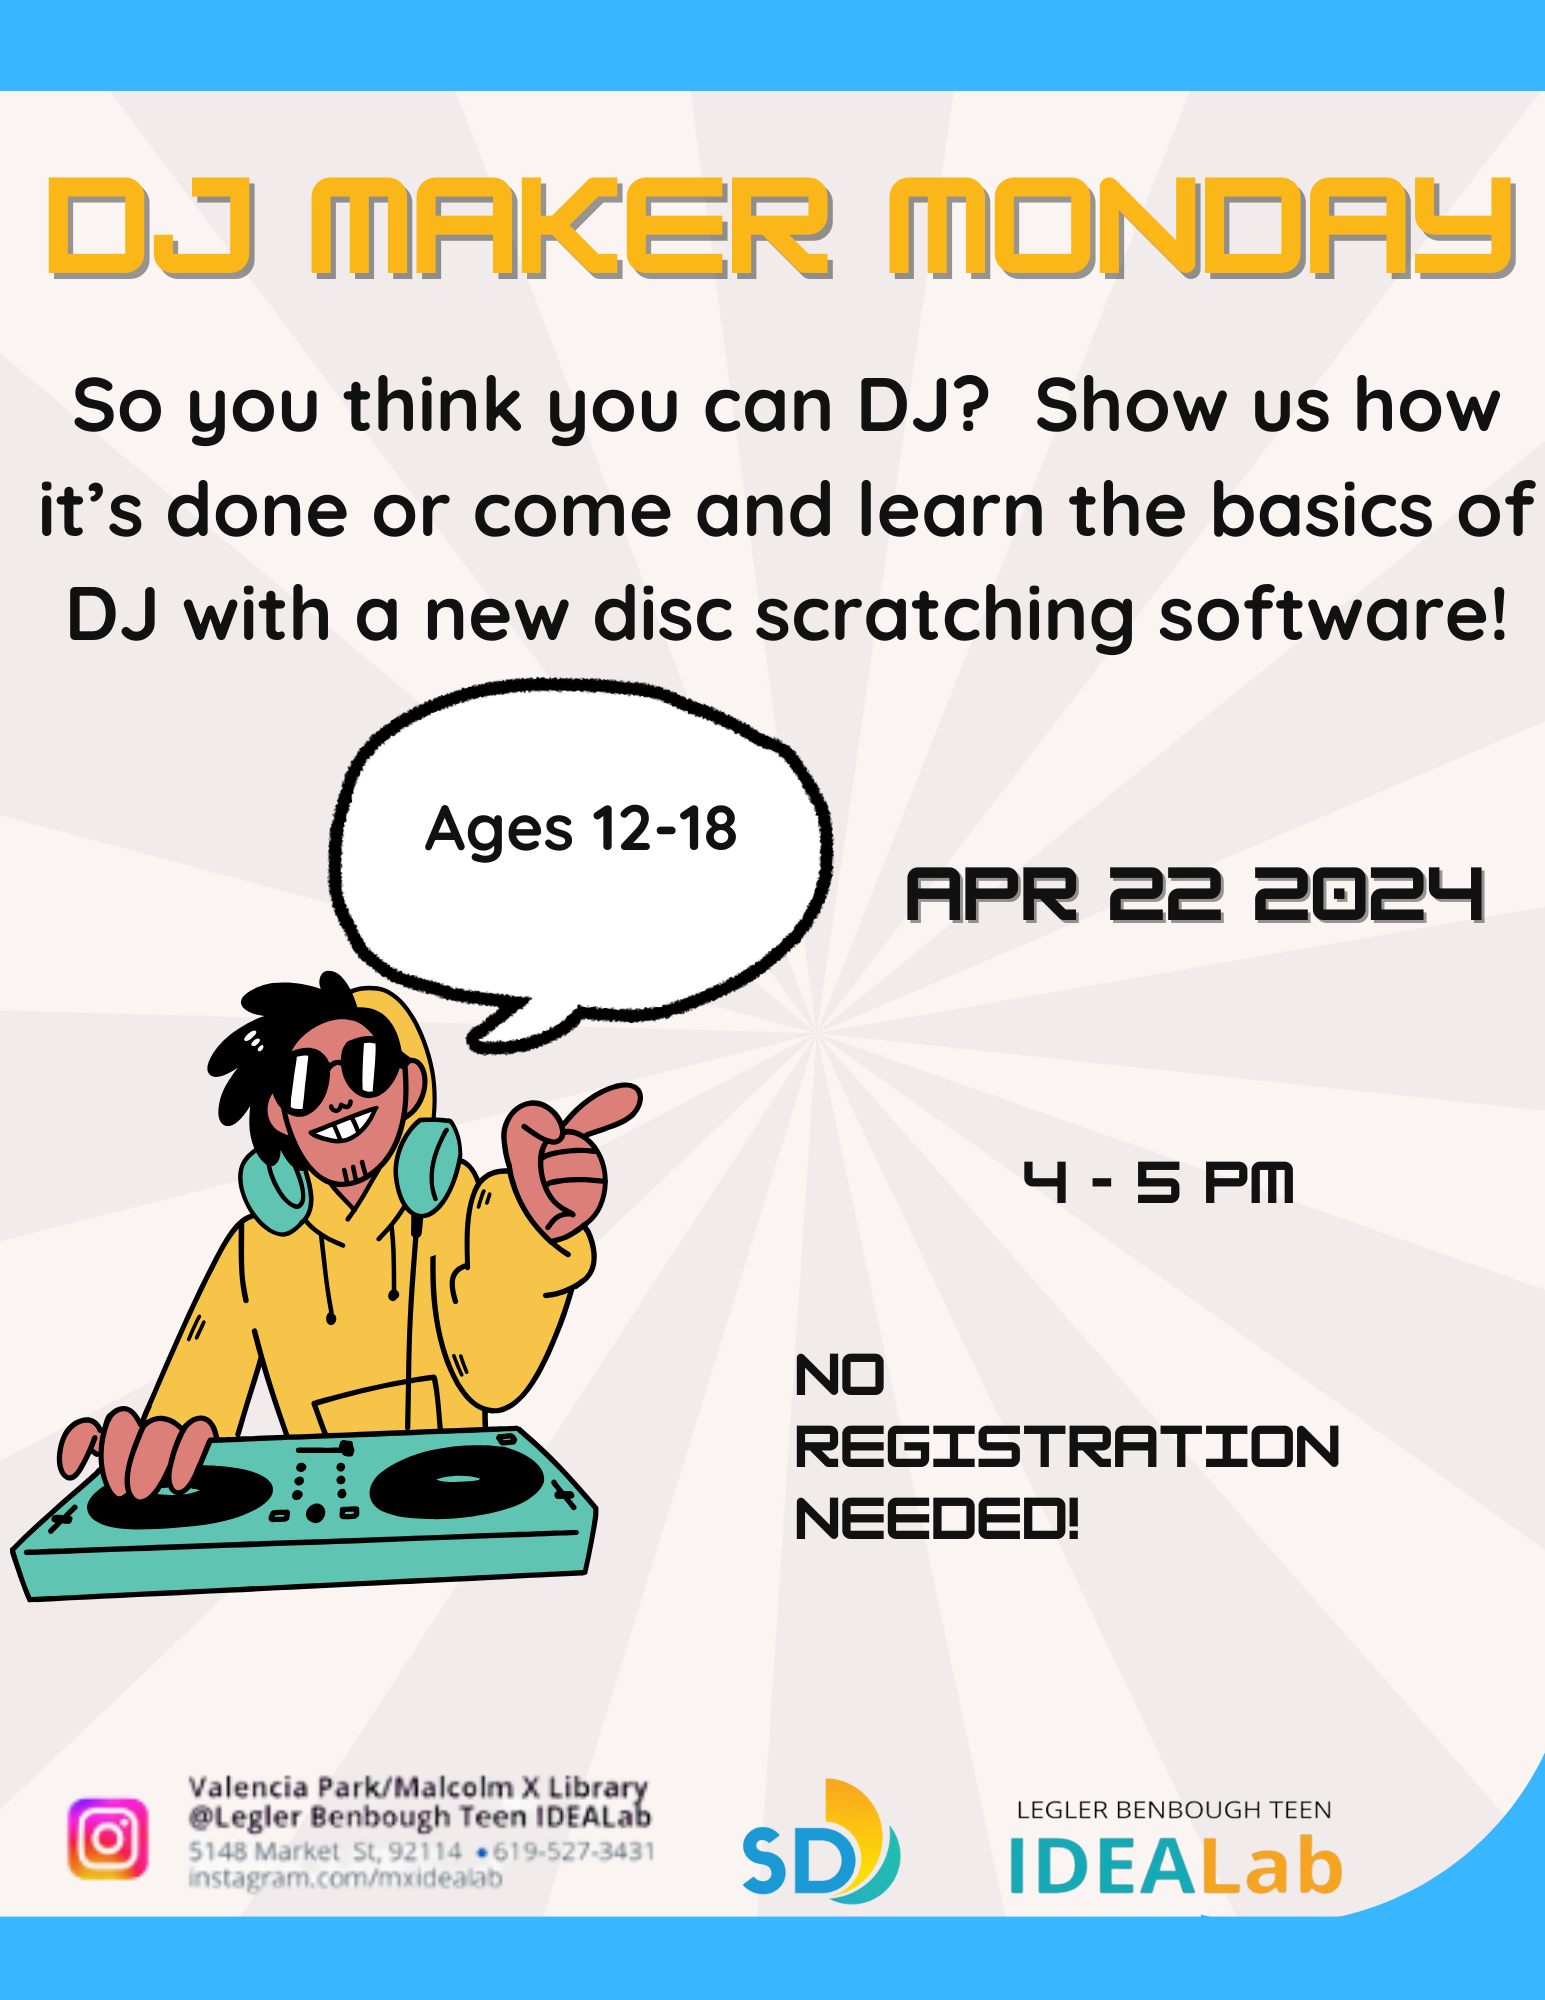 So you think you can DJ?  Show us how it’s done or come and learn the basics of DJ with a new disc scratching software!